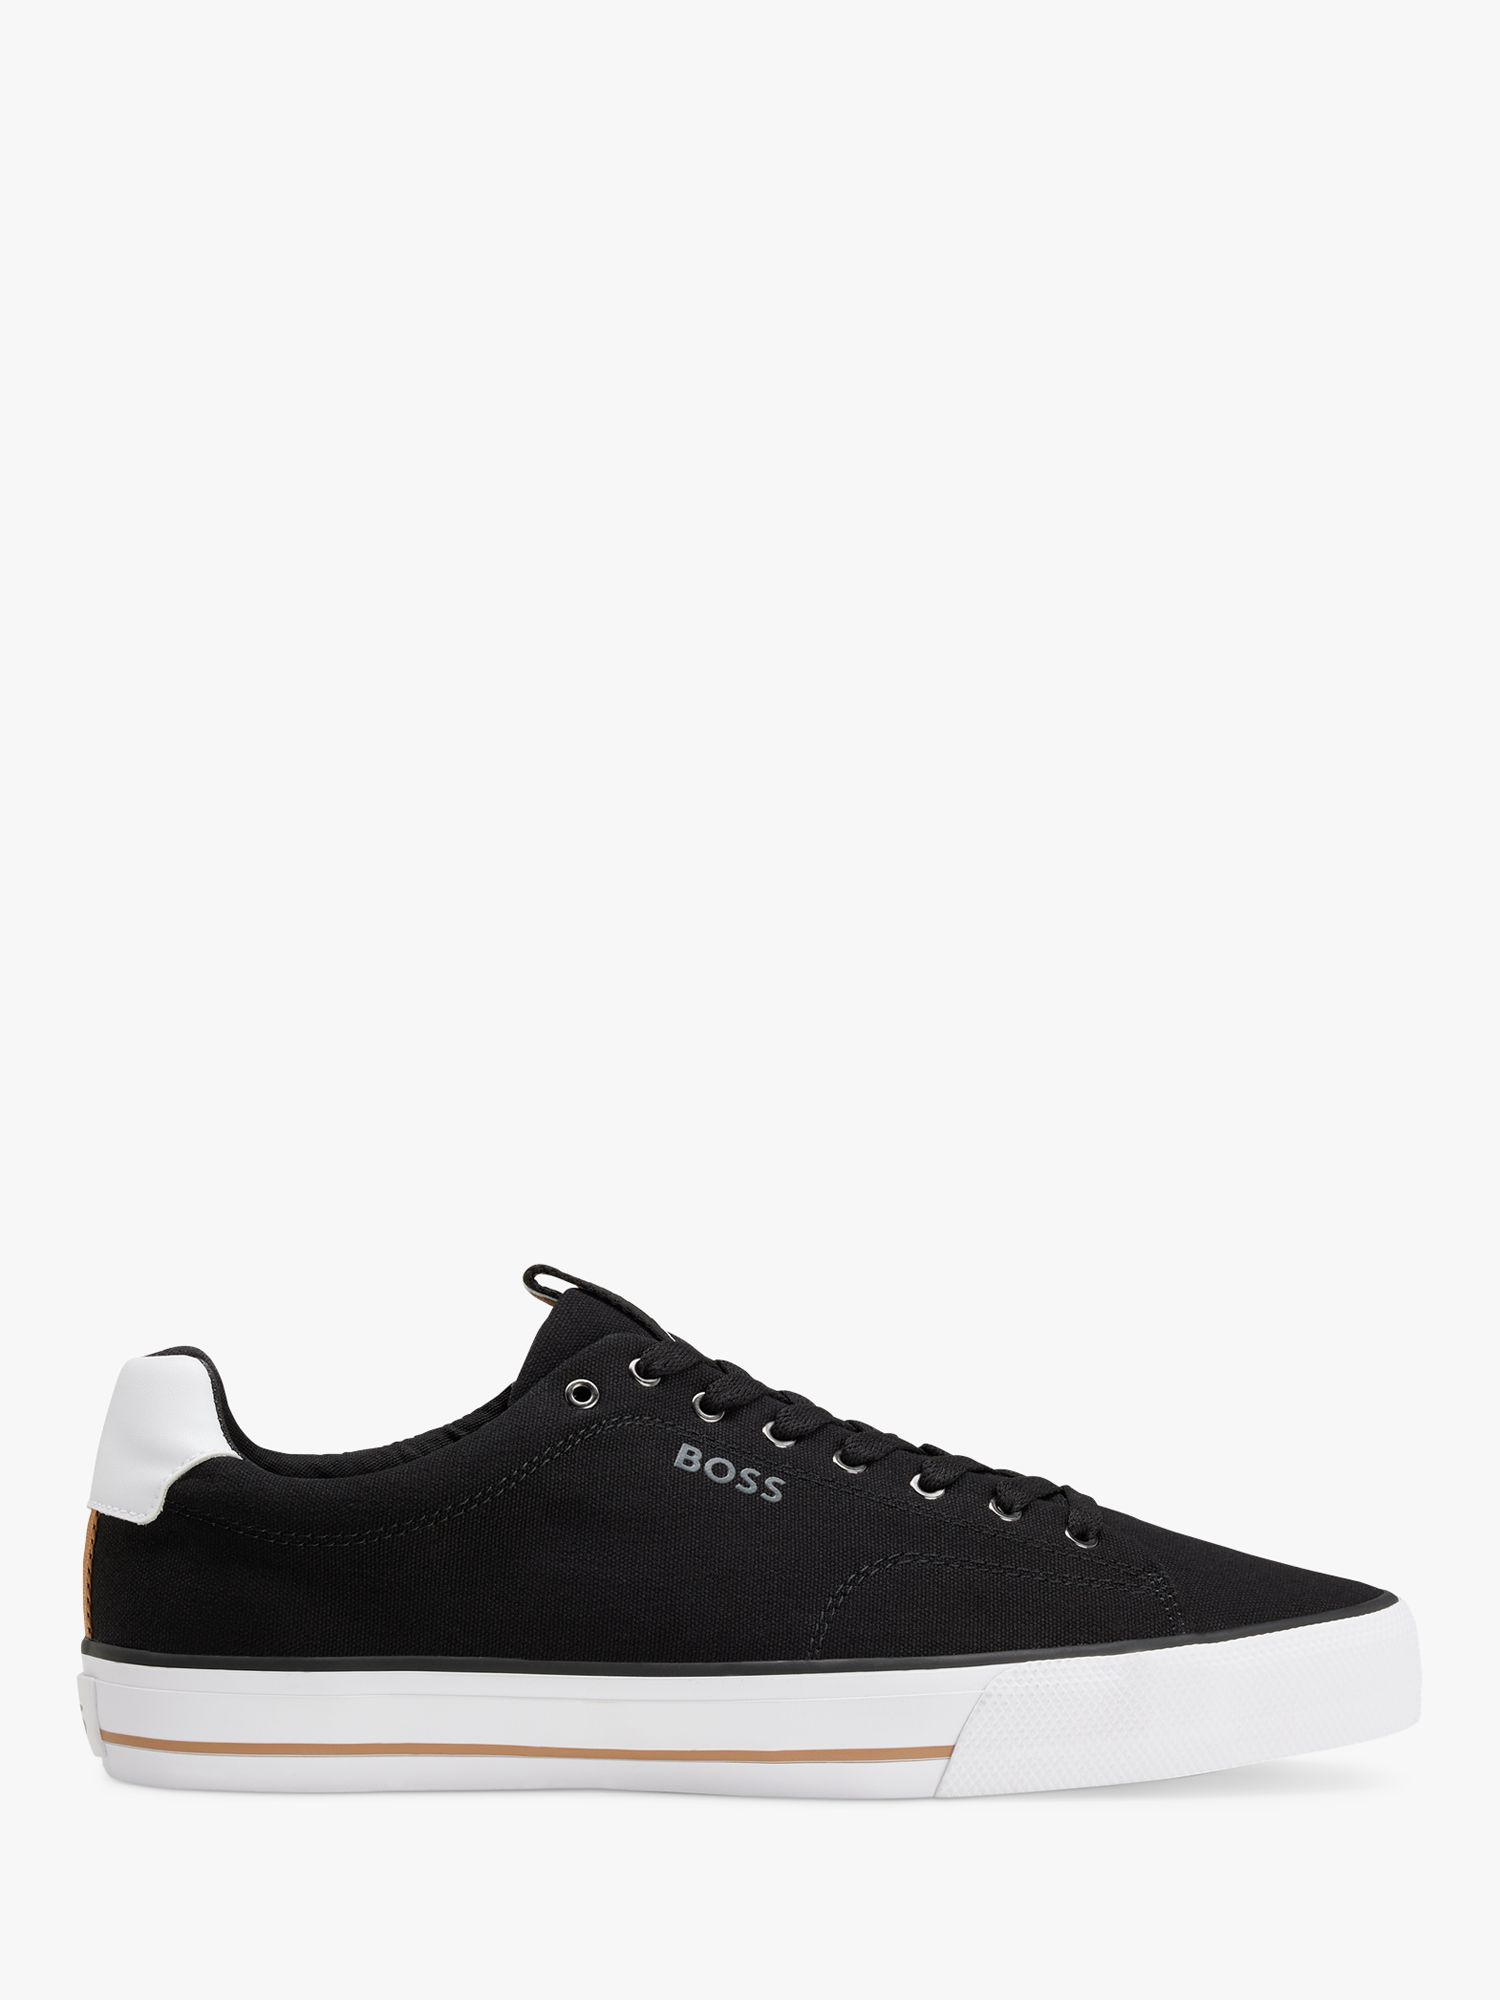 BOSS Aiden Cotton Canvas Trainers, Black at John Lewis & Partners